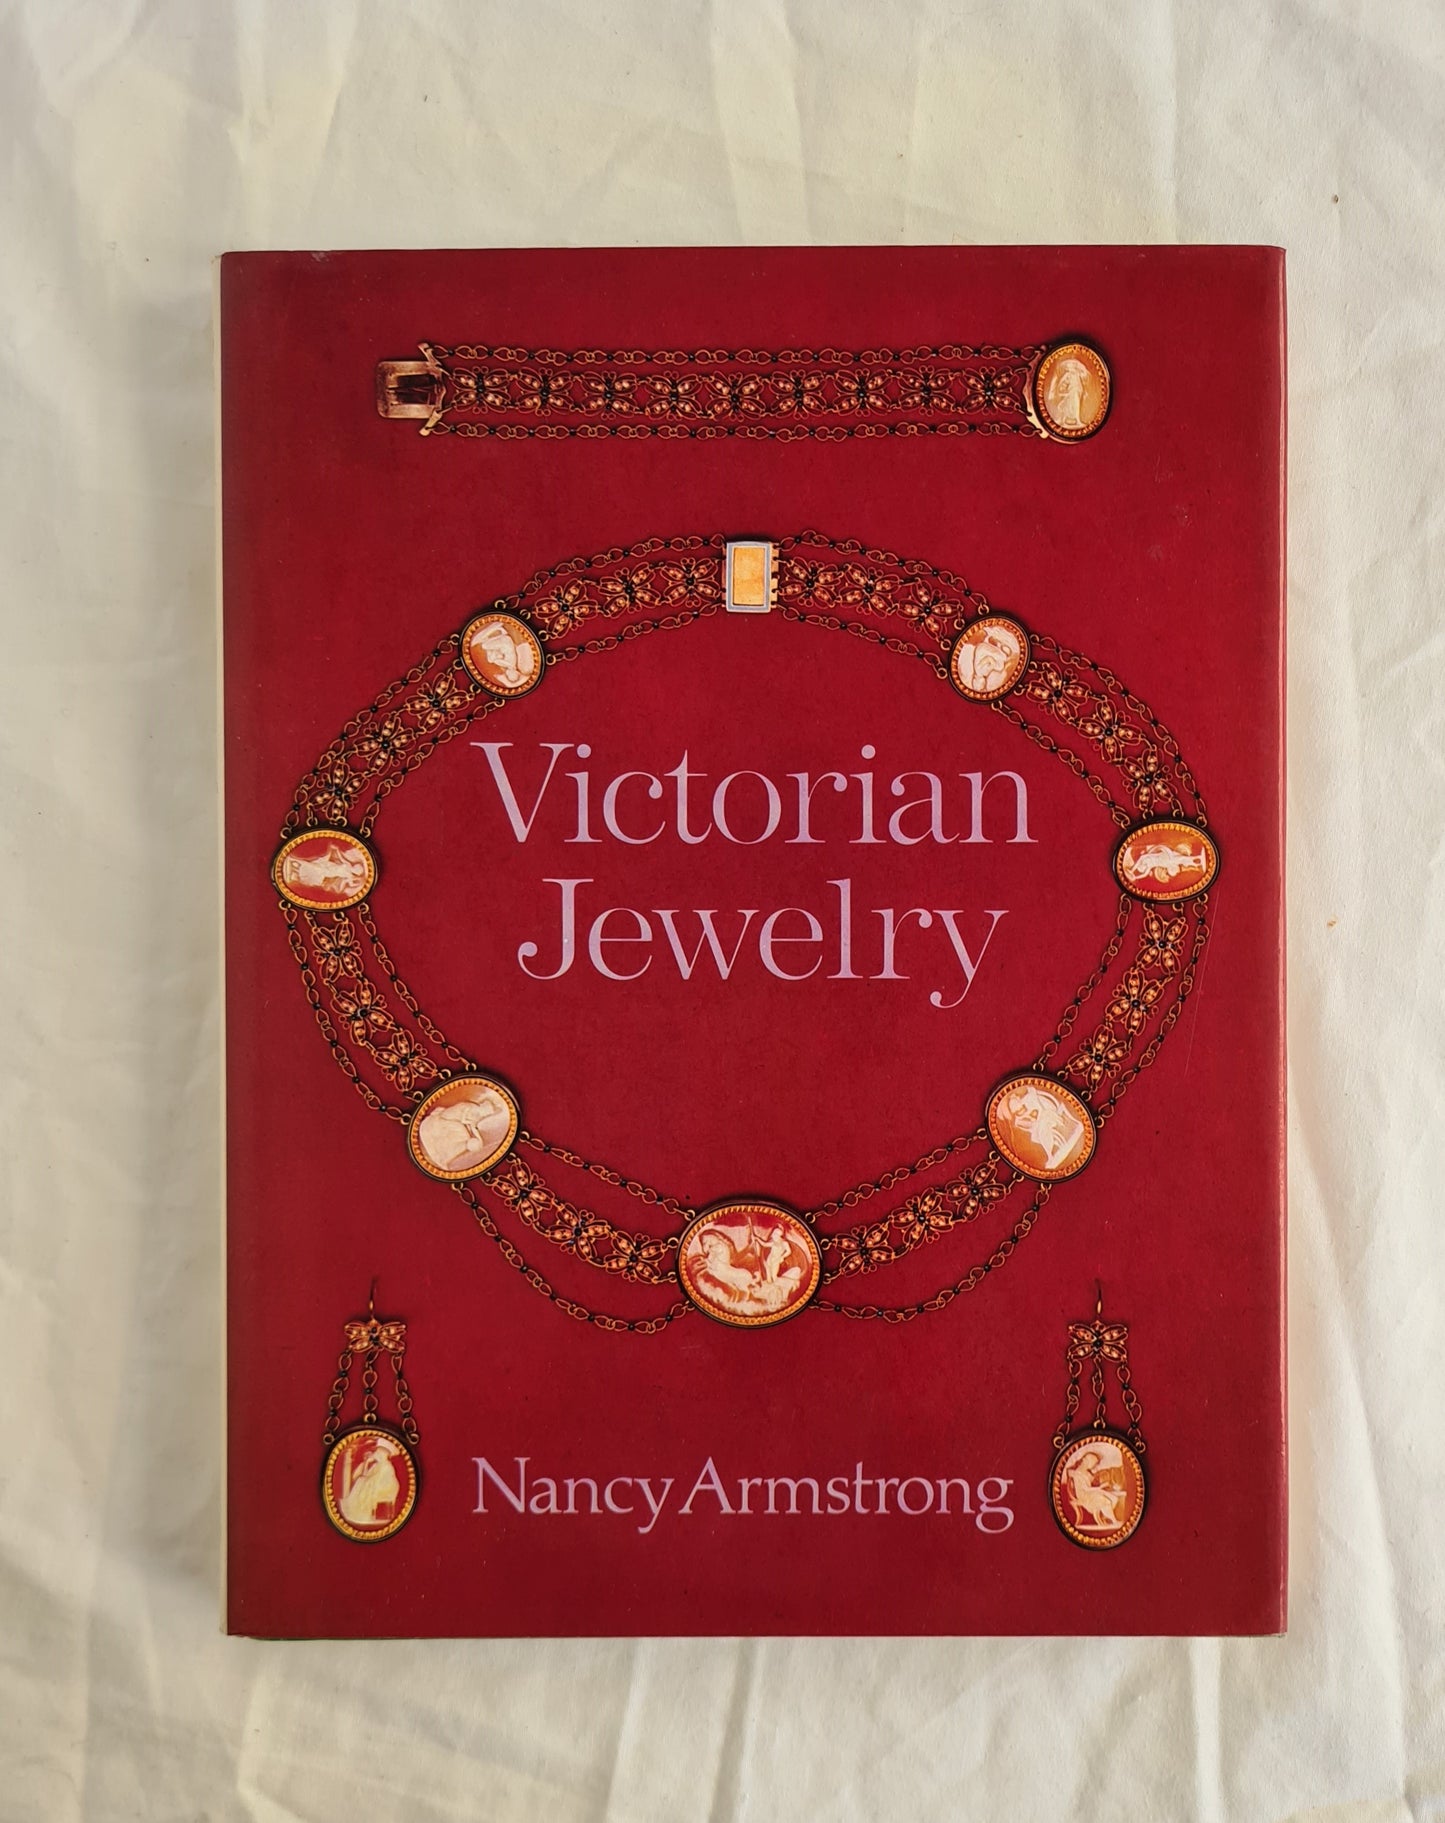 Victorian Jewelry  by Nancy Armstrong